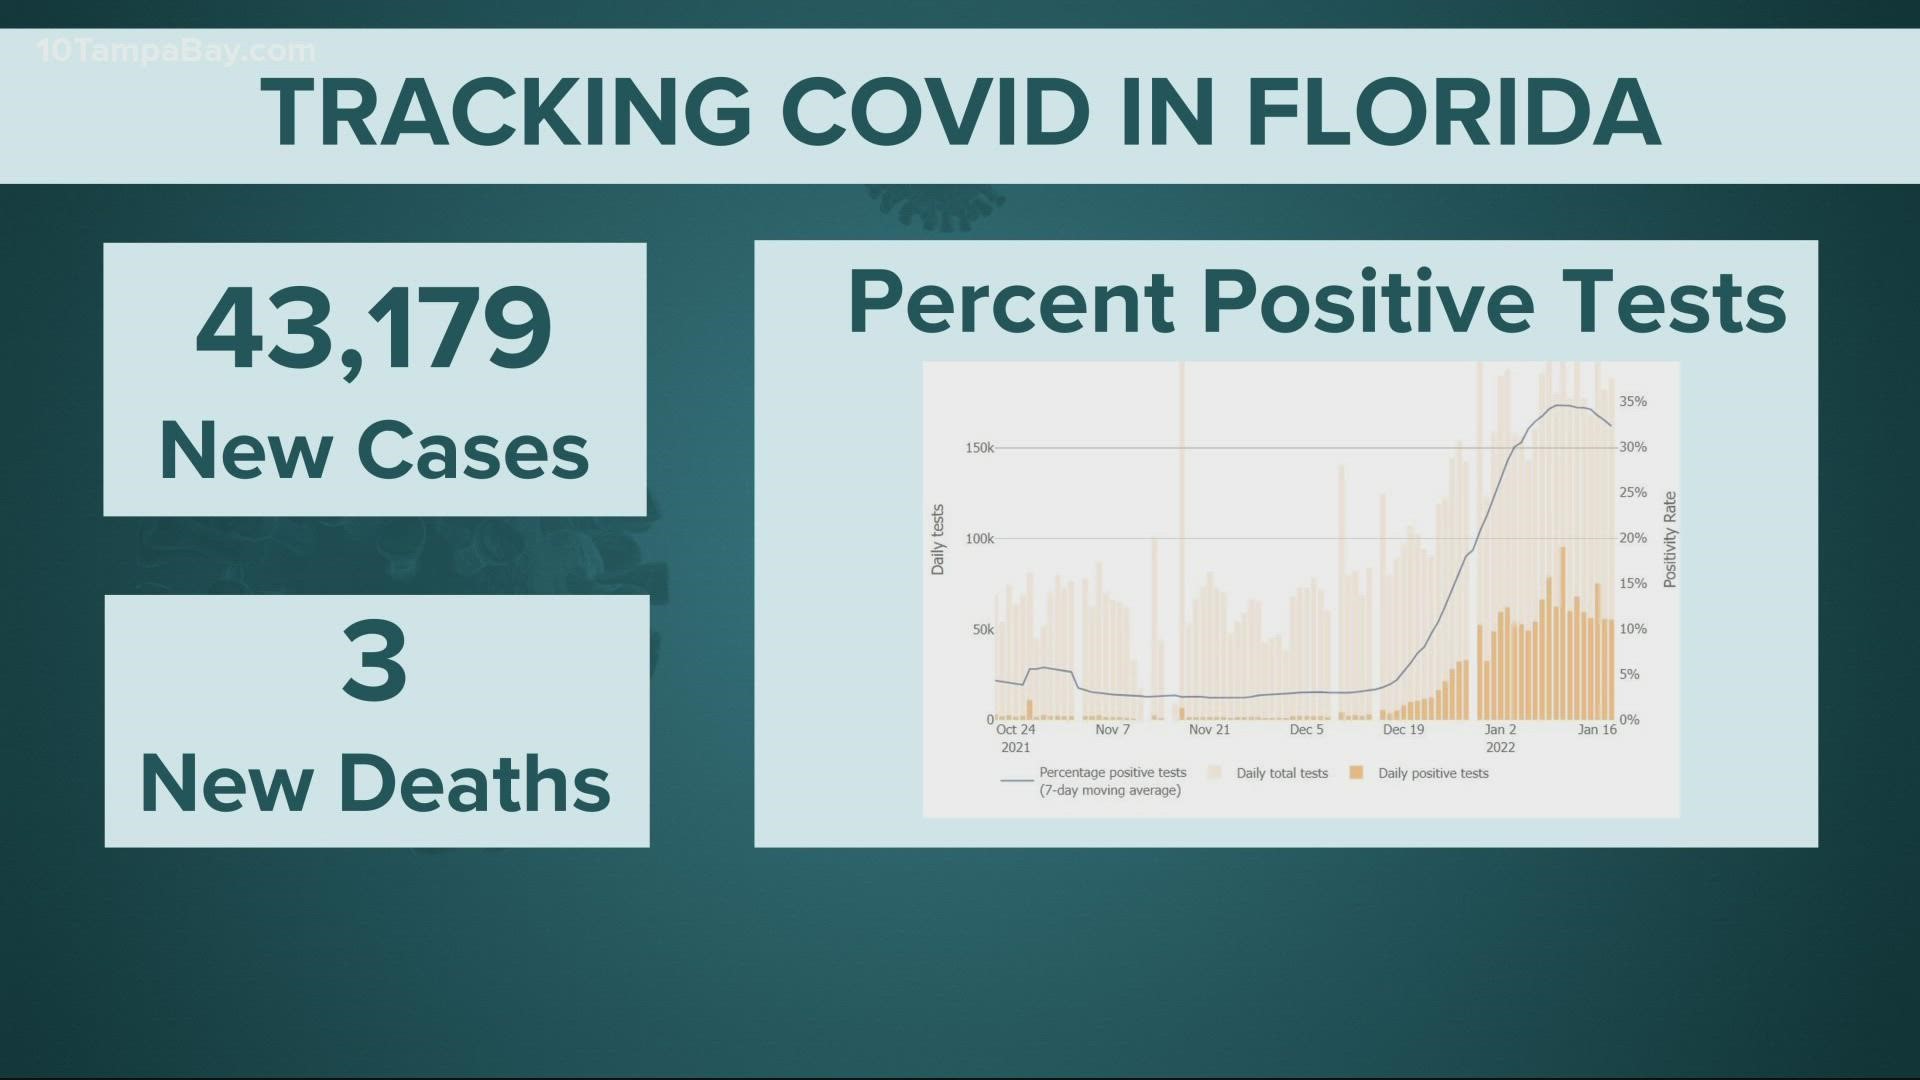 The Centers for Disease Control and Prevention reports 43,179 new cases in Florida for Jan. 18.